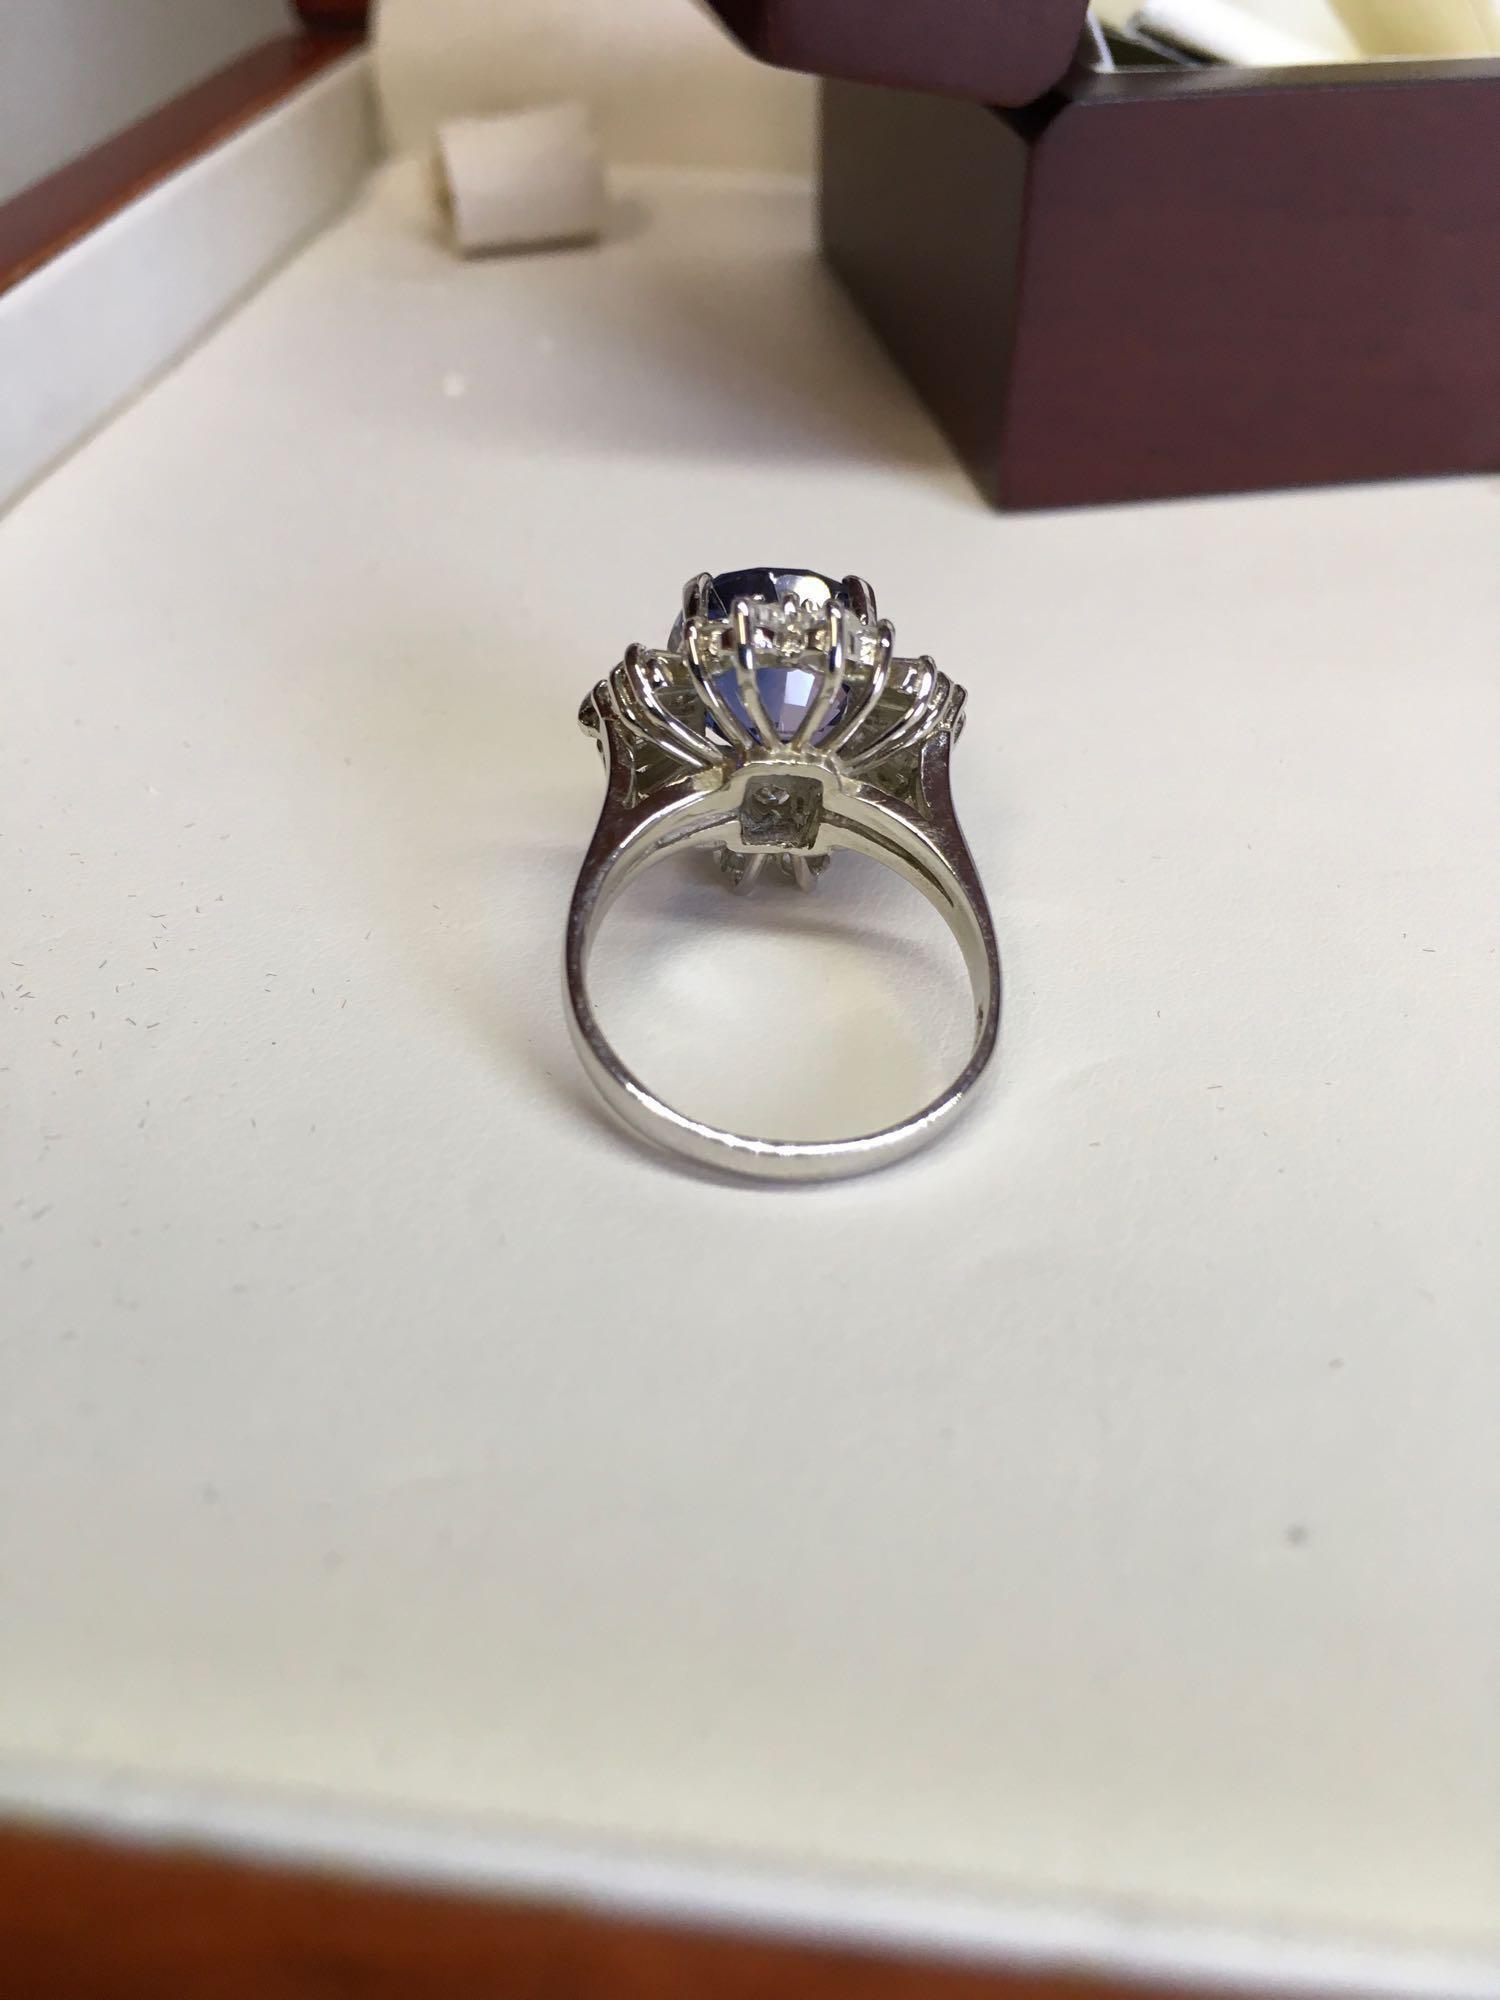 Daimond and Sapphire Ring 18K White Gold.